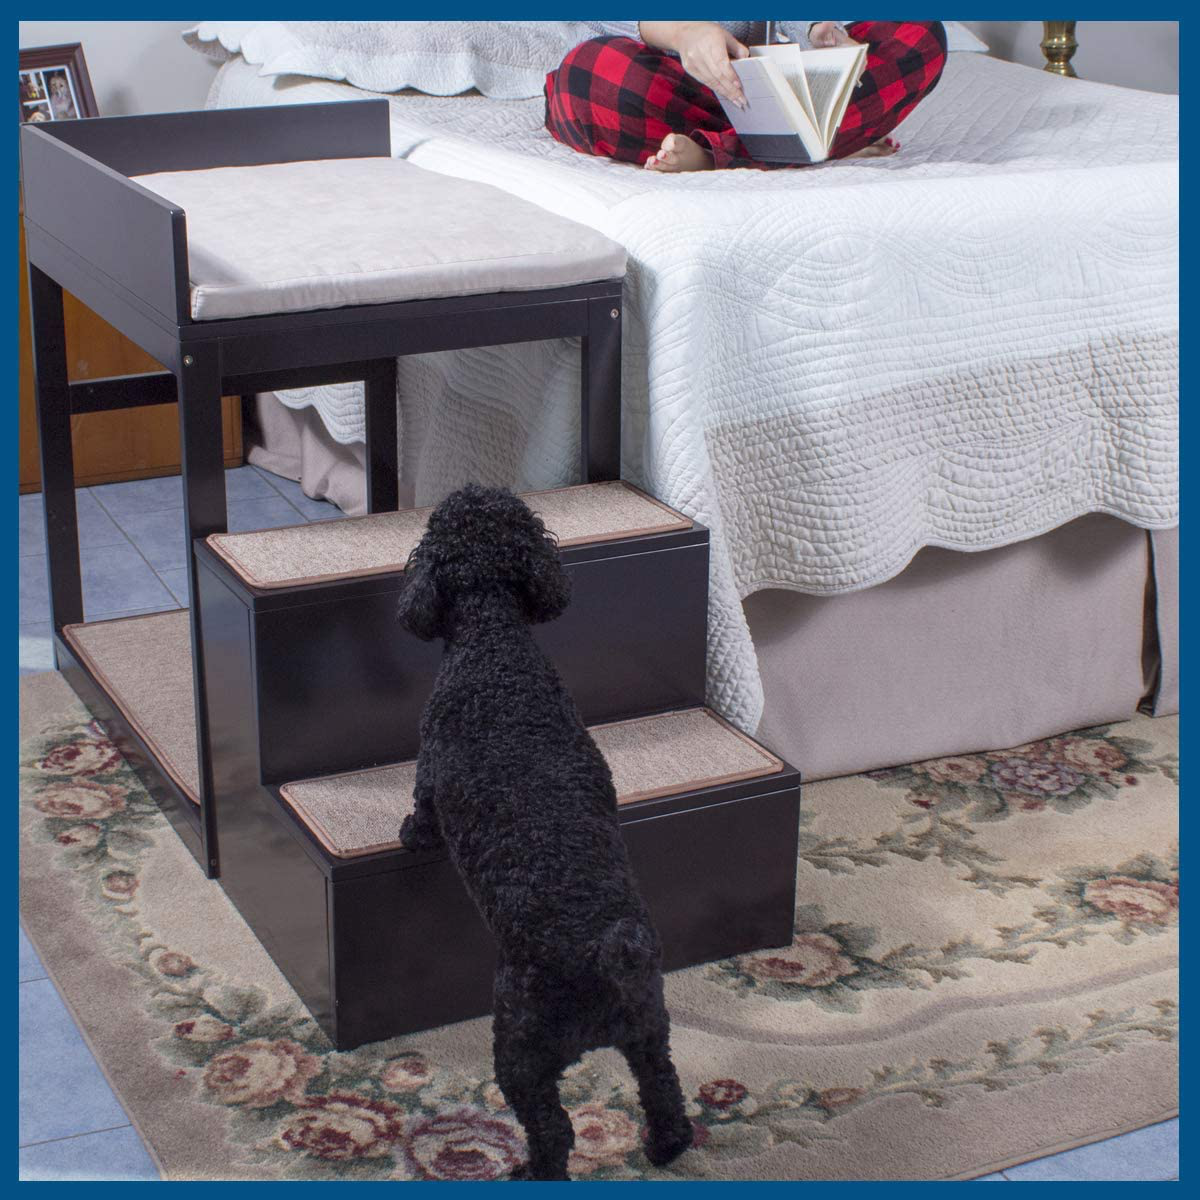 Penn-Plax Buddy Bunk - Multi-Level Bed and Step System for Dogs and Cats